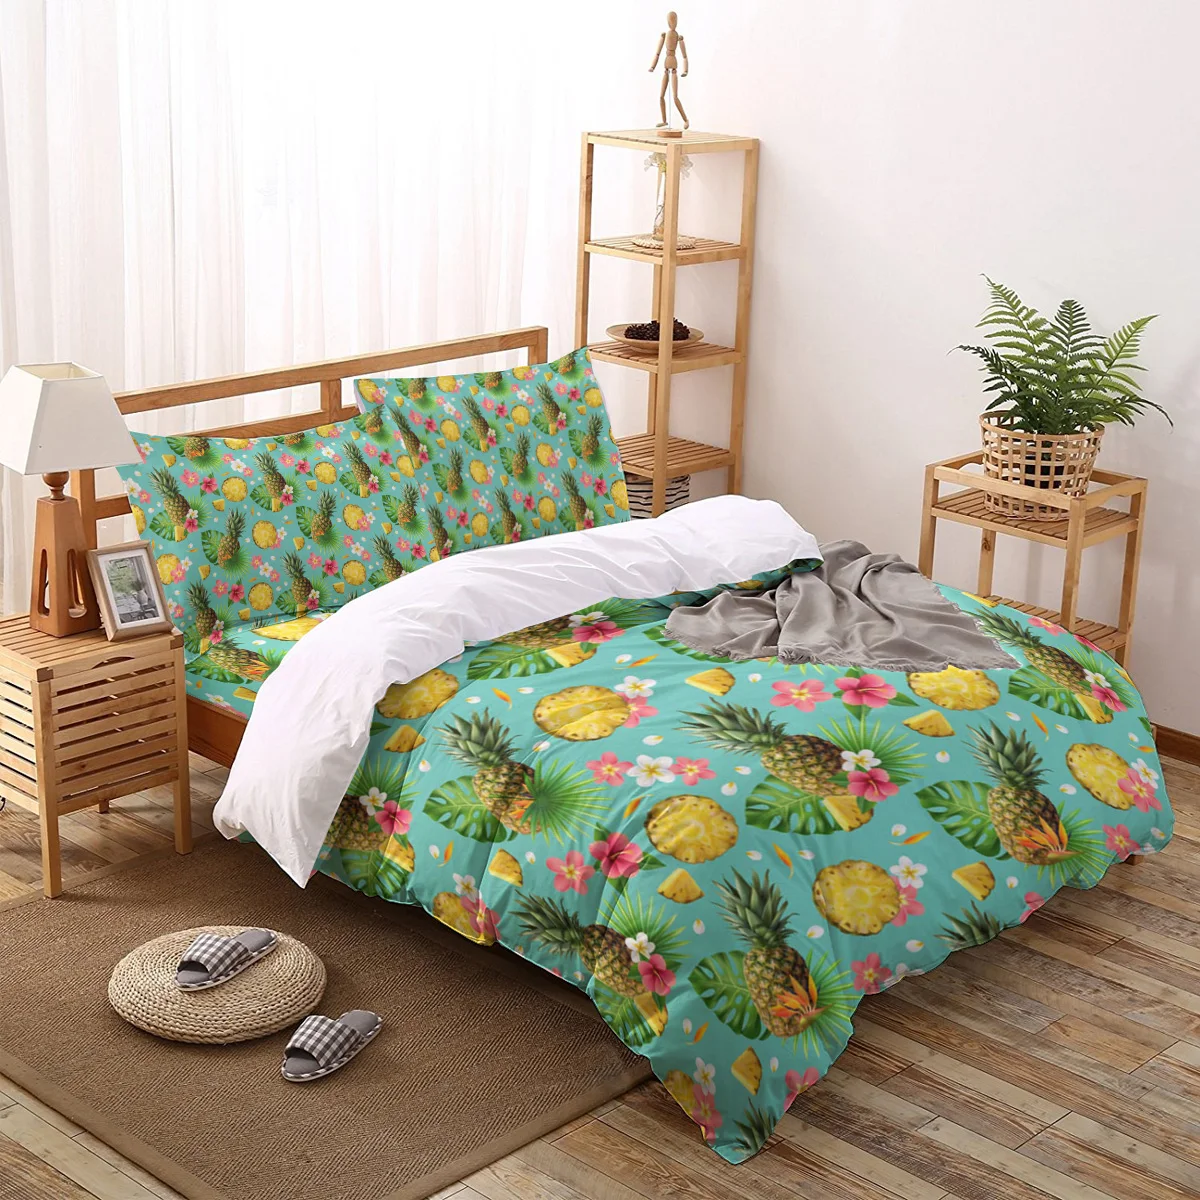 

Pineapple Palm Leaves Print Comforter Bedding Set Duvet Cover Set Queen King Bed Home Housse De Couette Gift